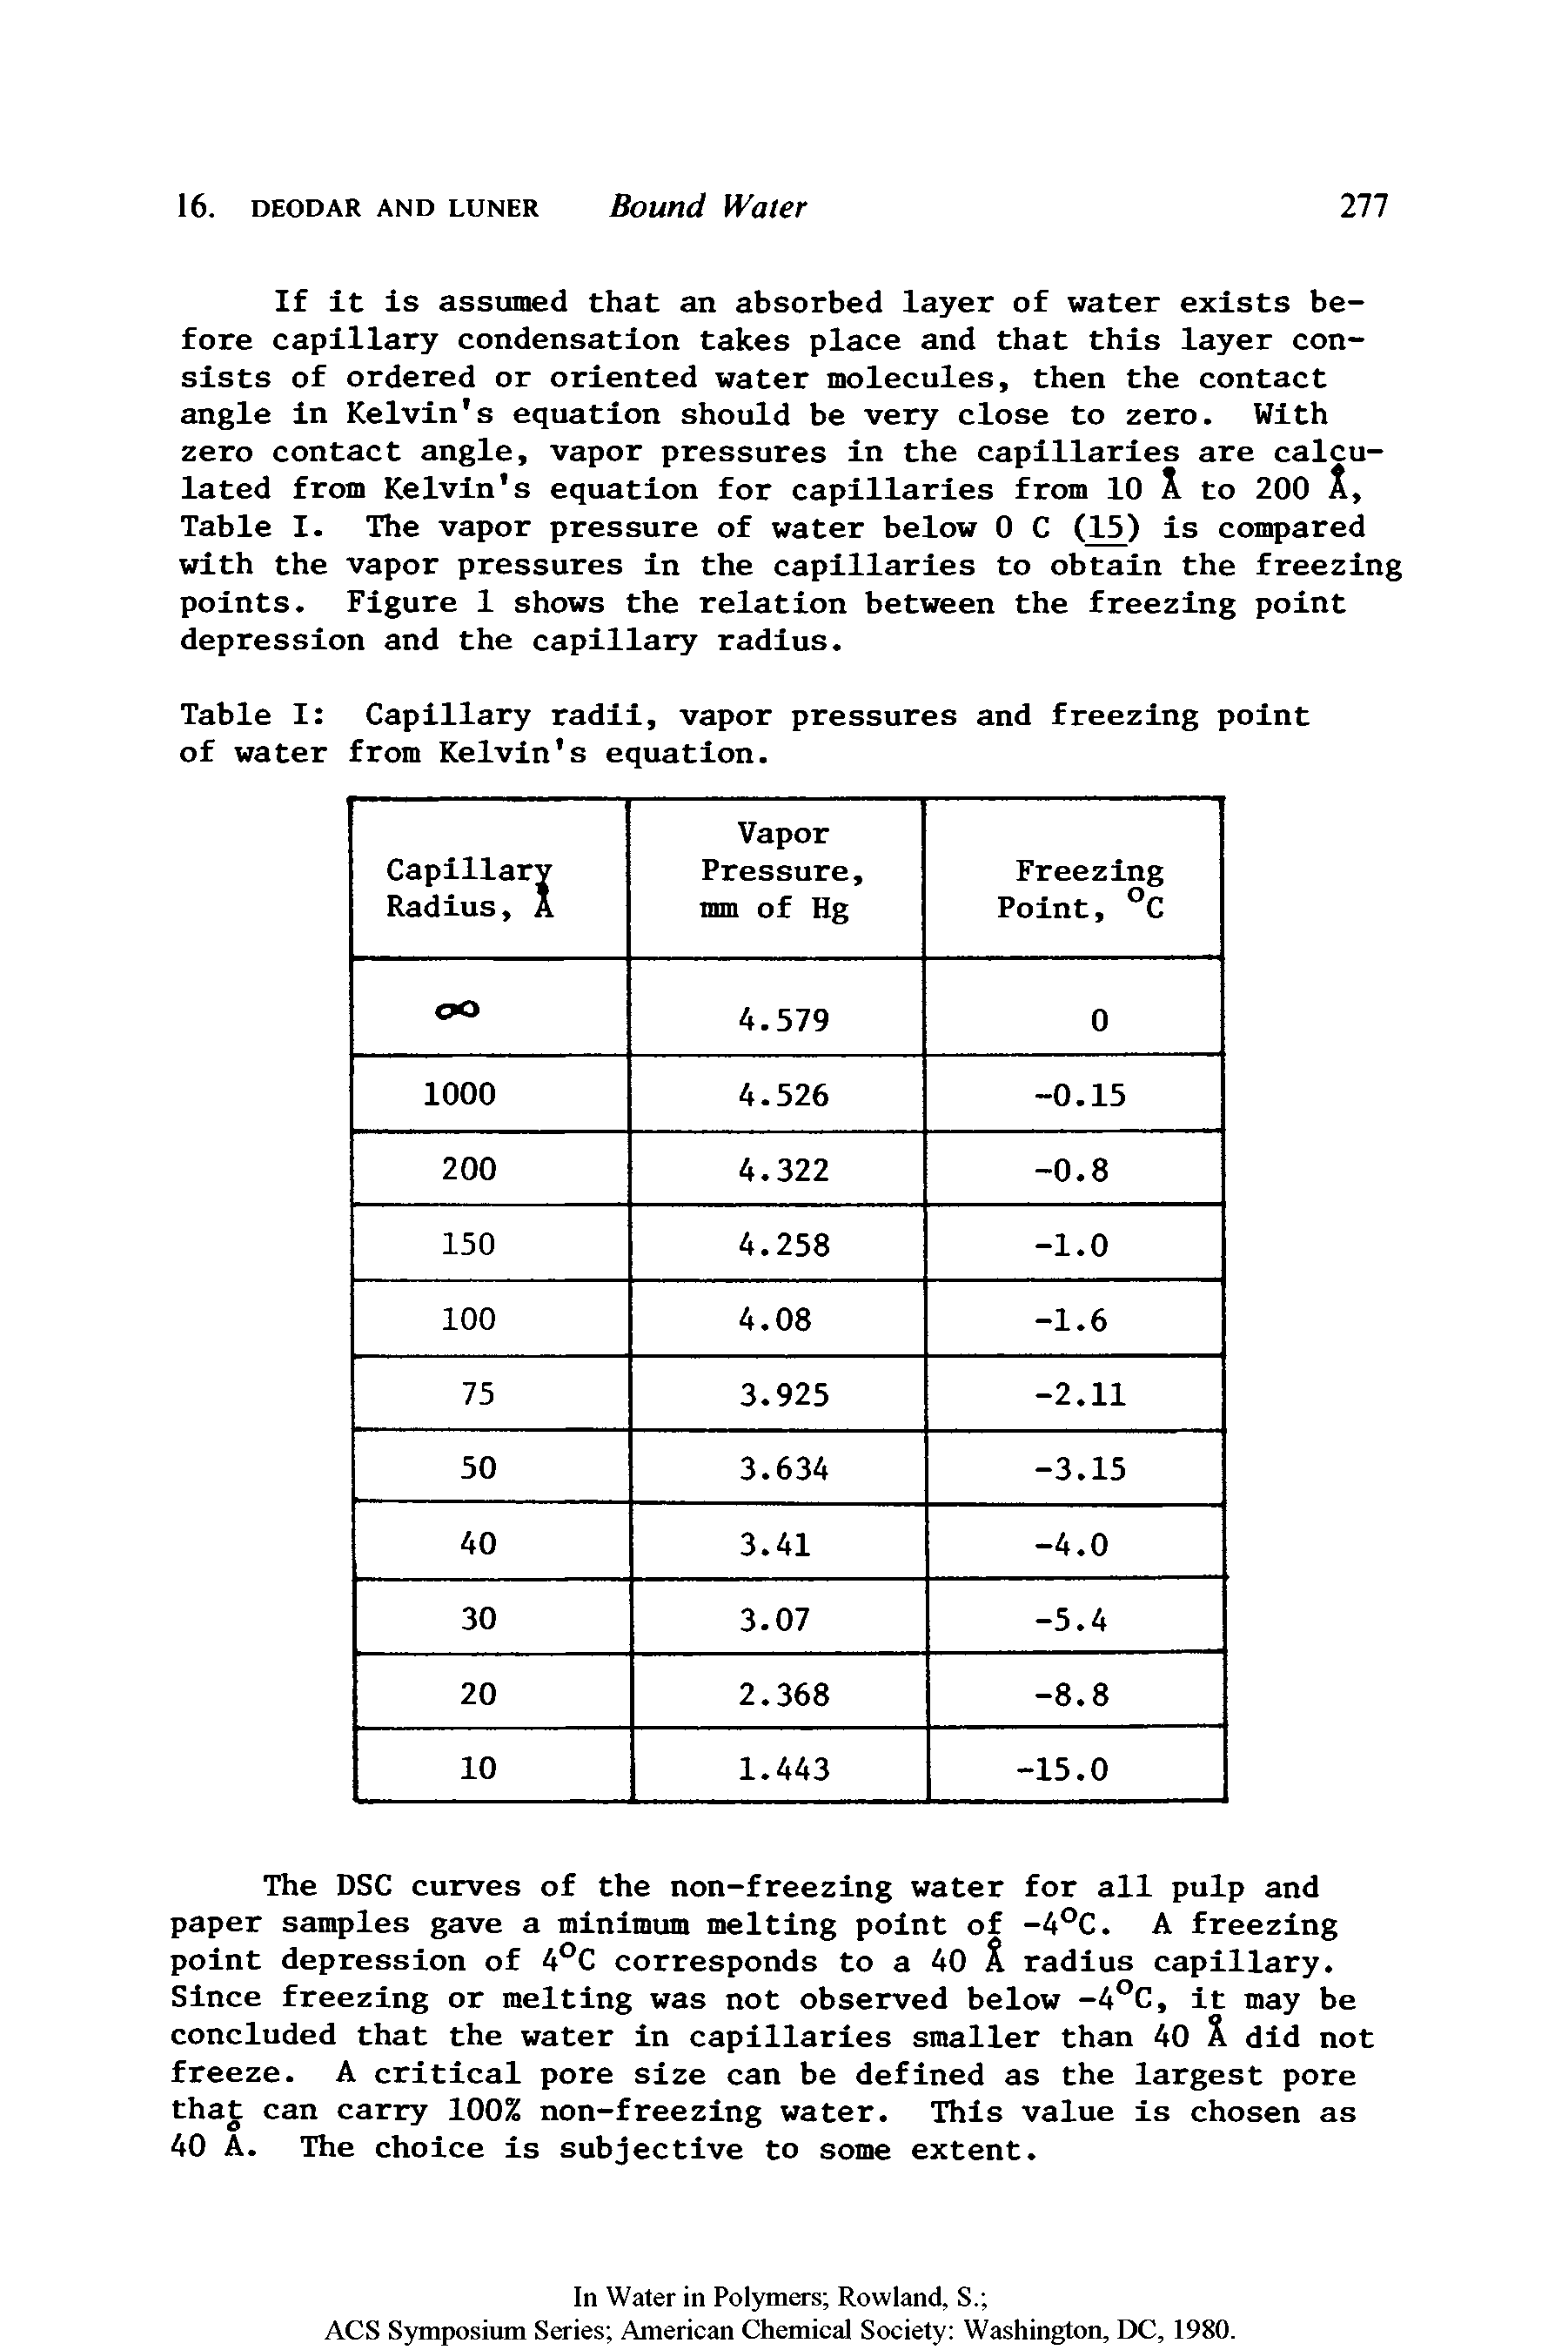 Table I Capillary radii, vapor pressures and freezing point of water from Kelvin s equation.